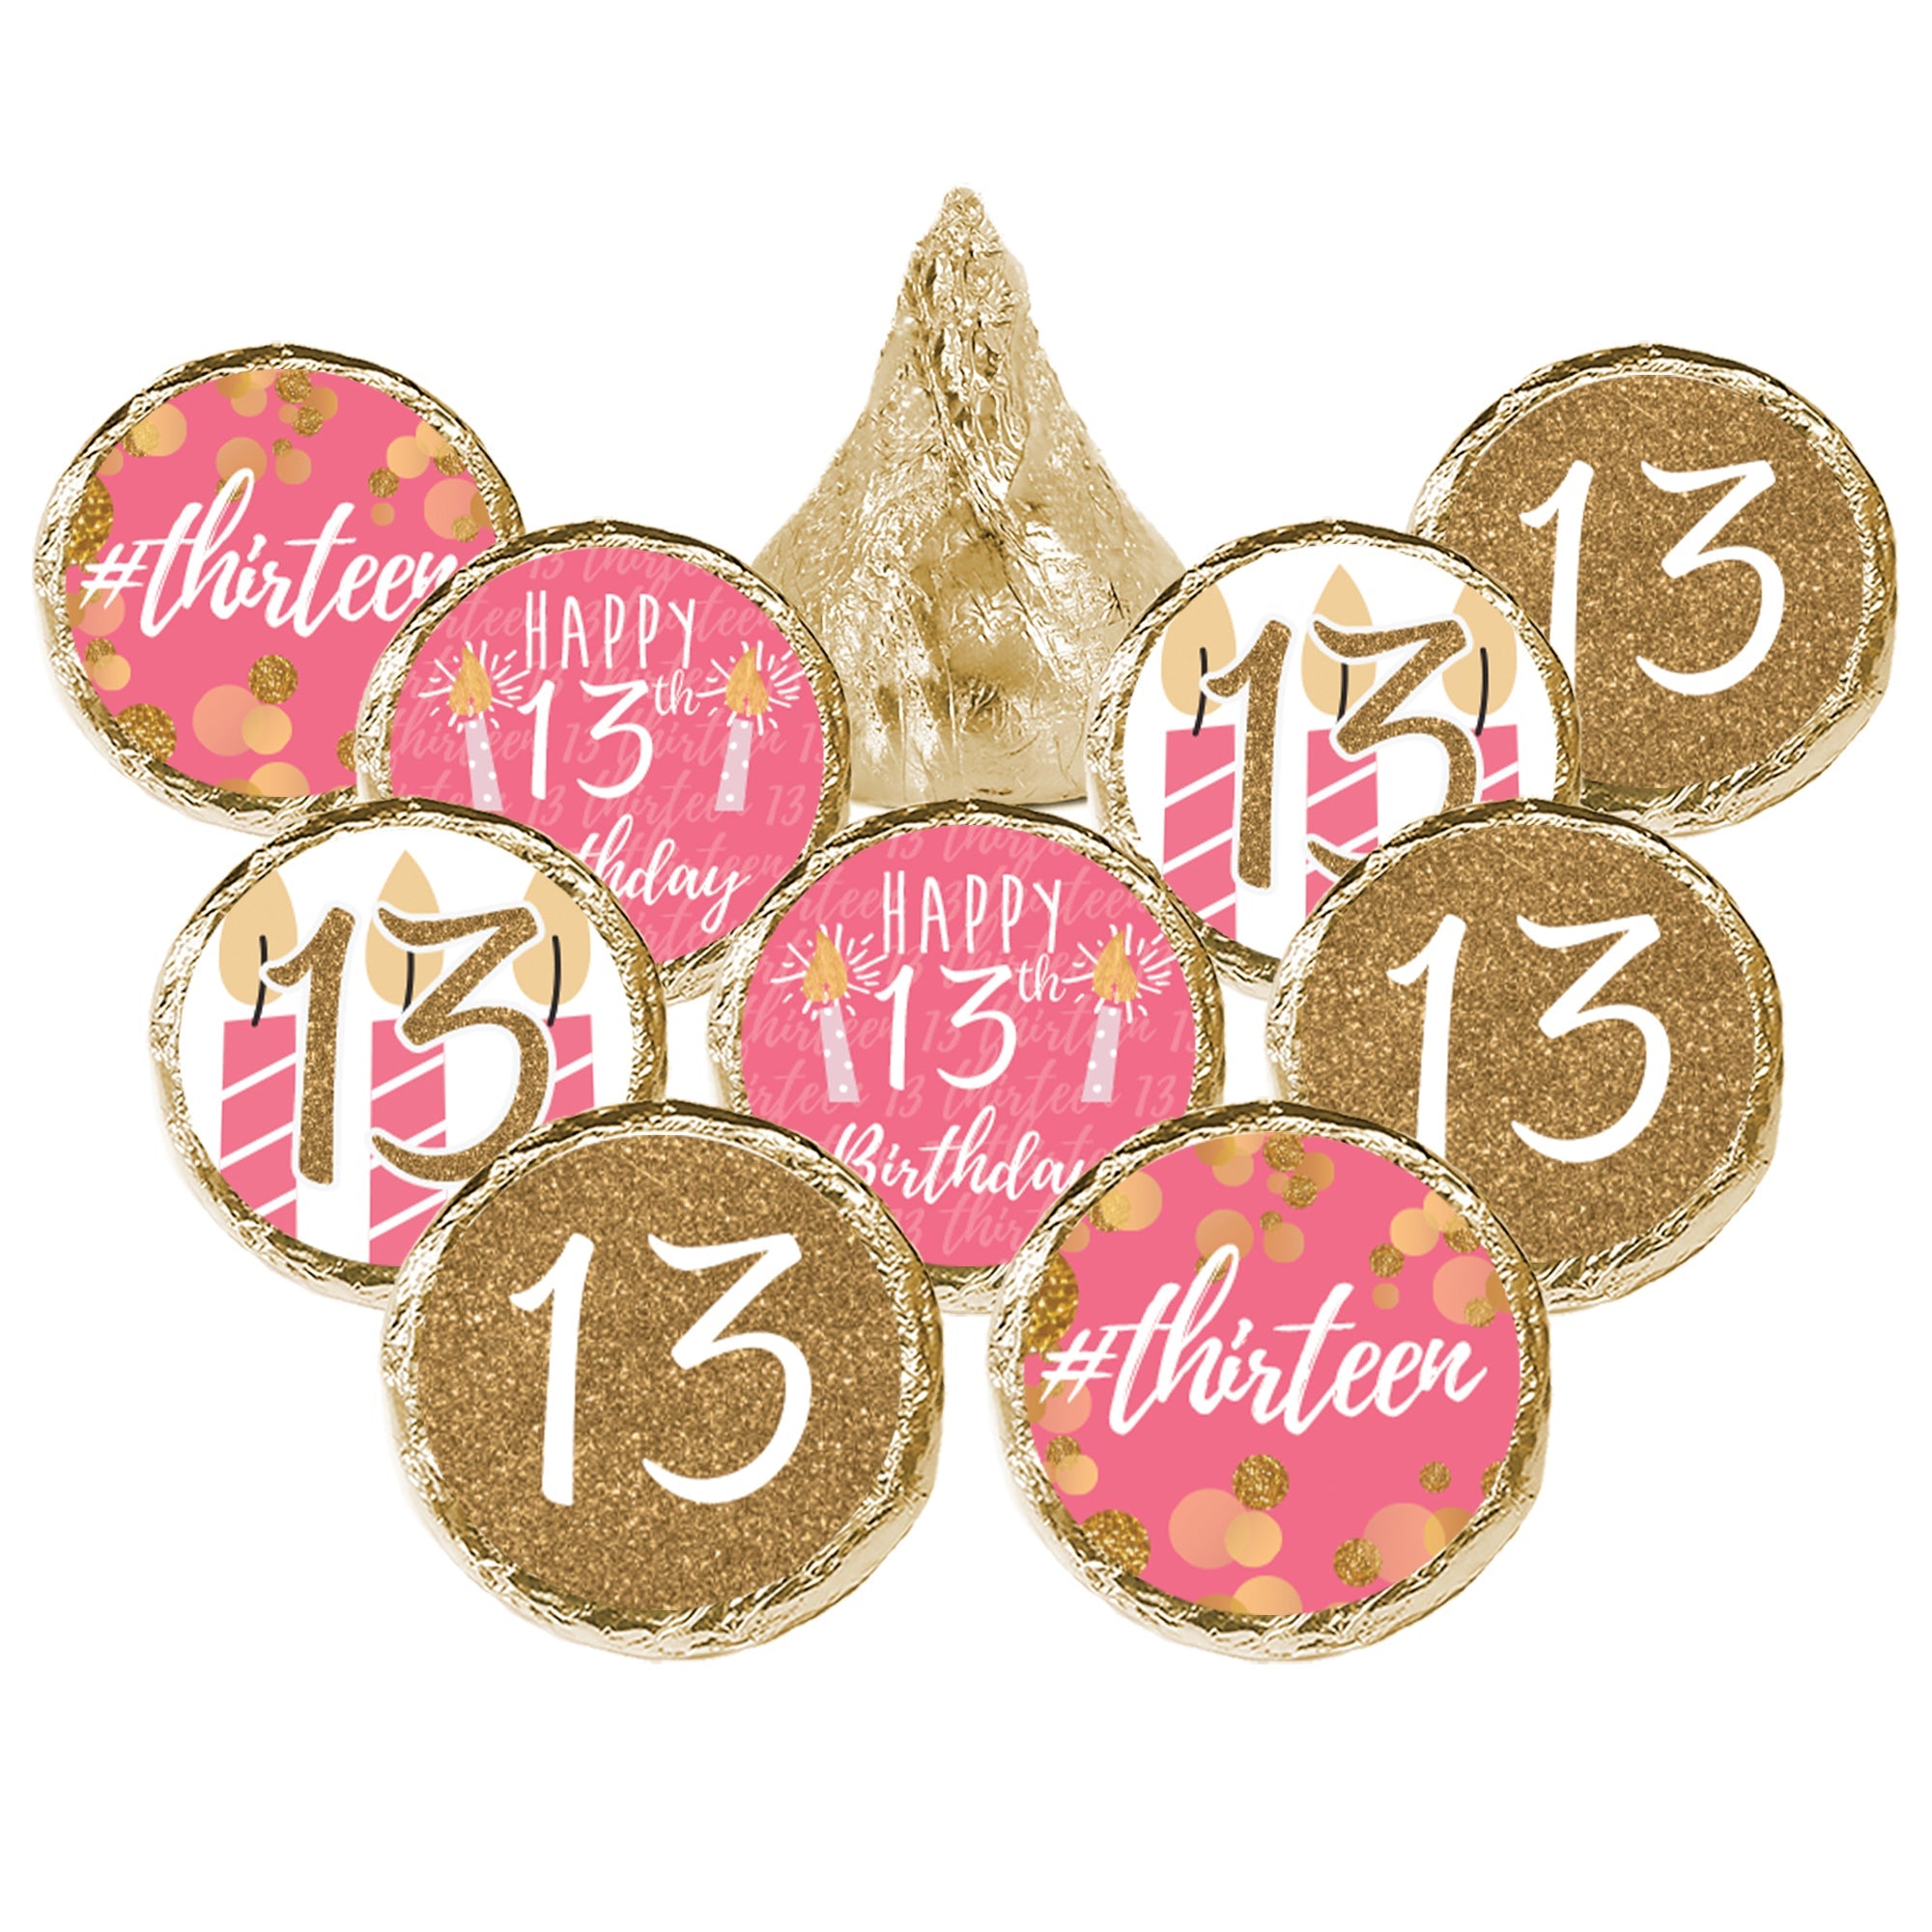 Personalized Pink and Gold Birthday Water Bottle Labels – Distinctivs Party